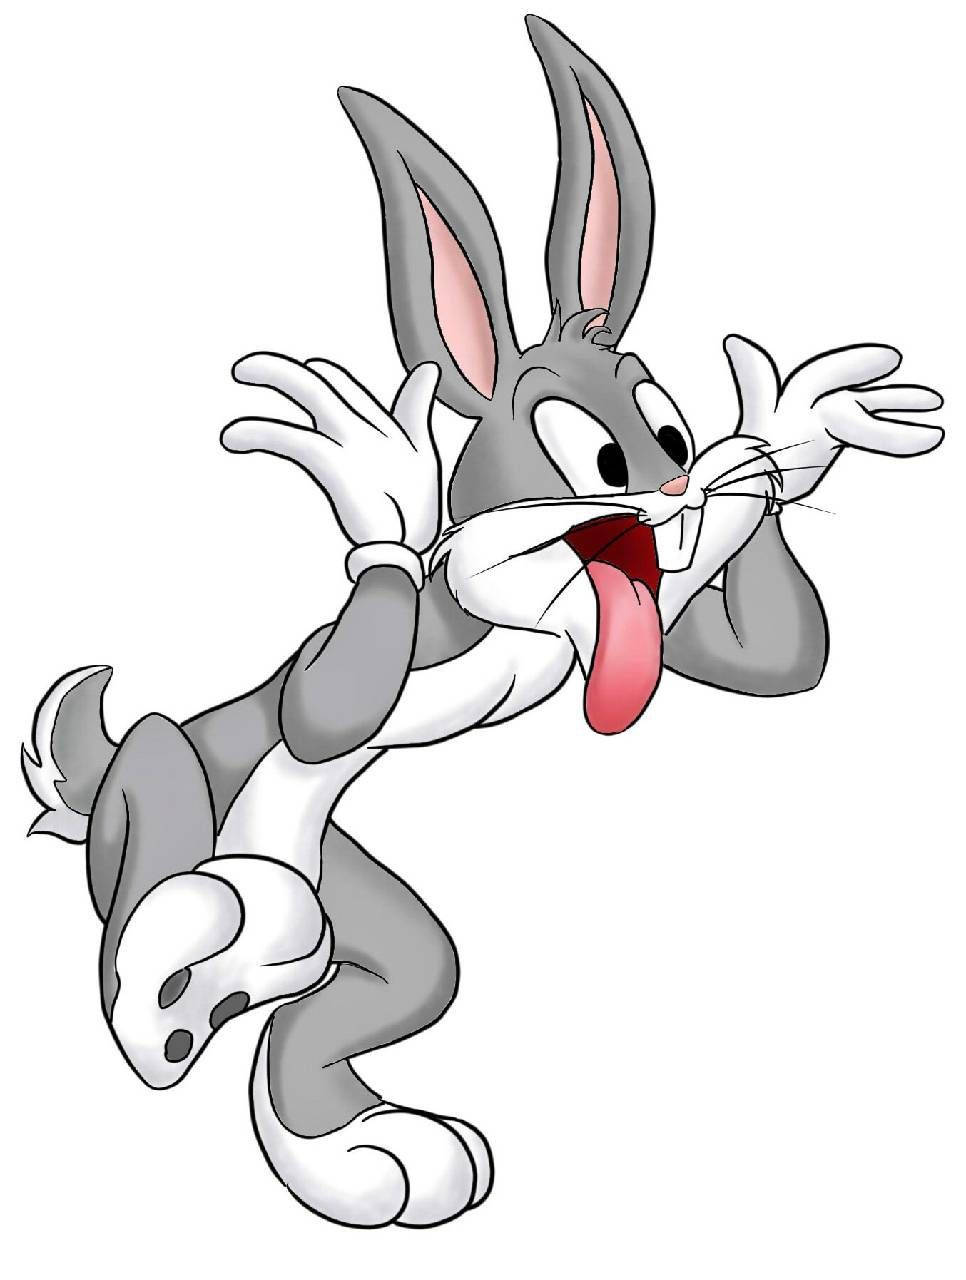 Taunting Bugs Bunny Wallpaper